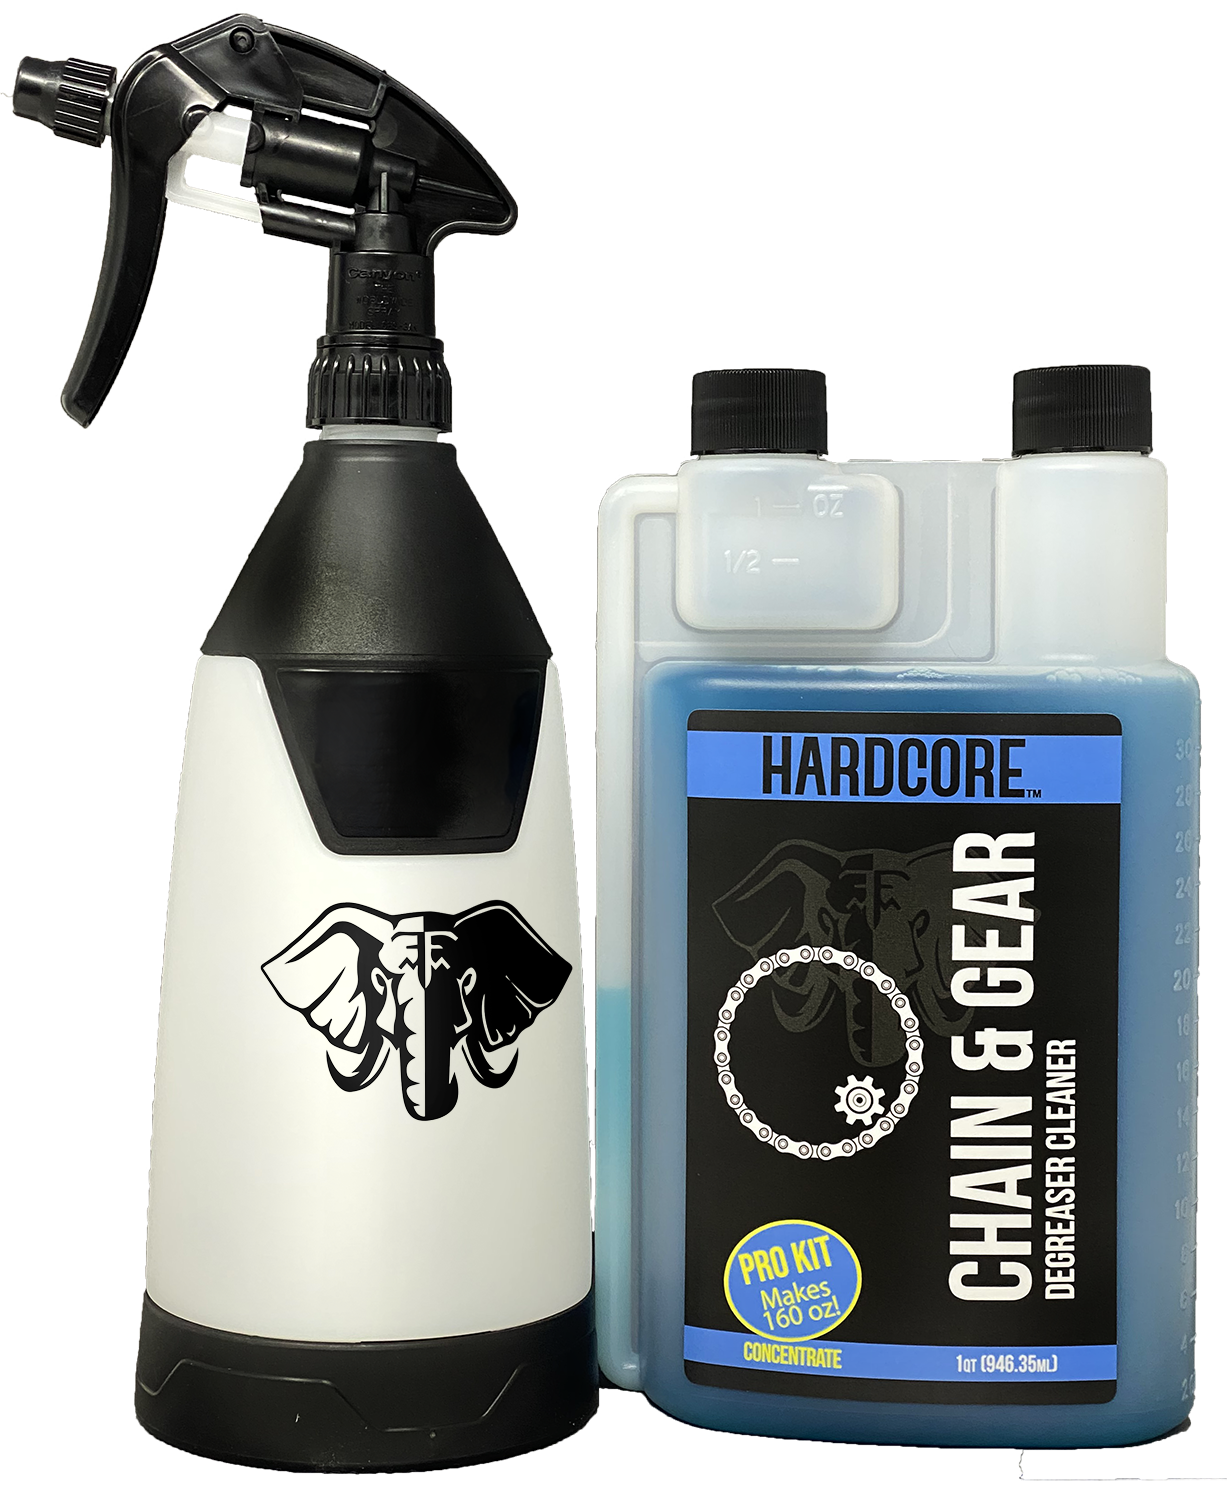 Hardcore Chain & Gear Cleaner Pro-Kit, 32 oz Concentrate with Deluxe Trigger Bottle Hardcore, chain, gear, cleaner, kit, concentrate, degreaser, bike, bicycle, cleaning, maintenance, care, cassette, dirty, greasy